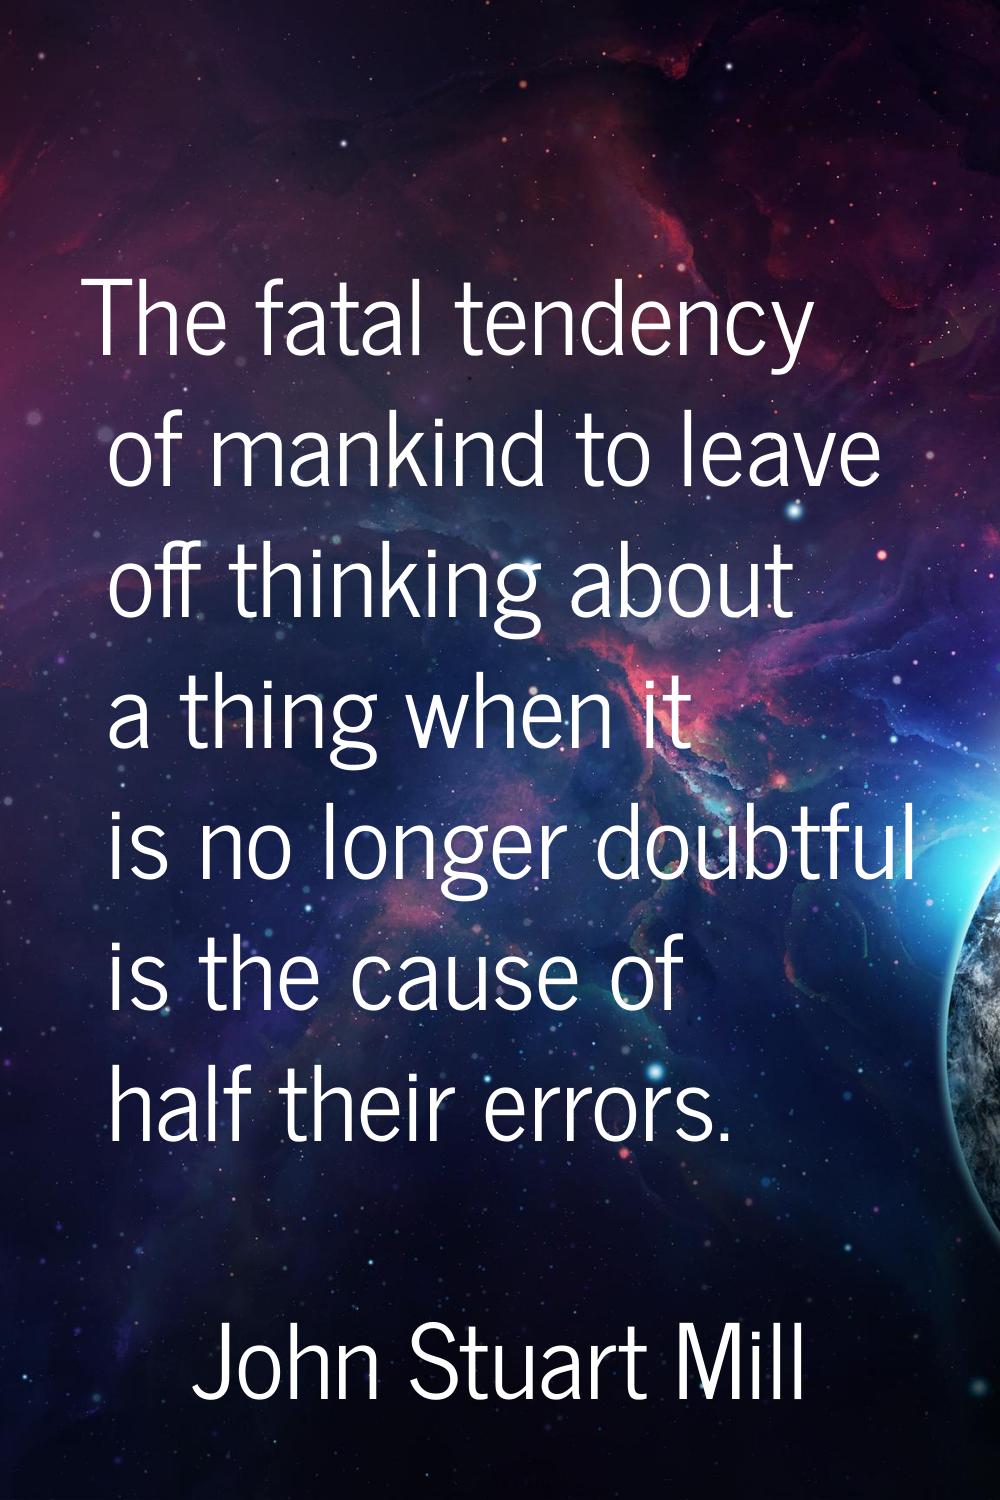 The fatal tendency of mankind to leave off thinking about a thing when it is no longer doubtful is 